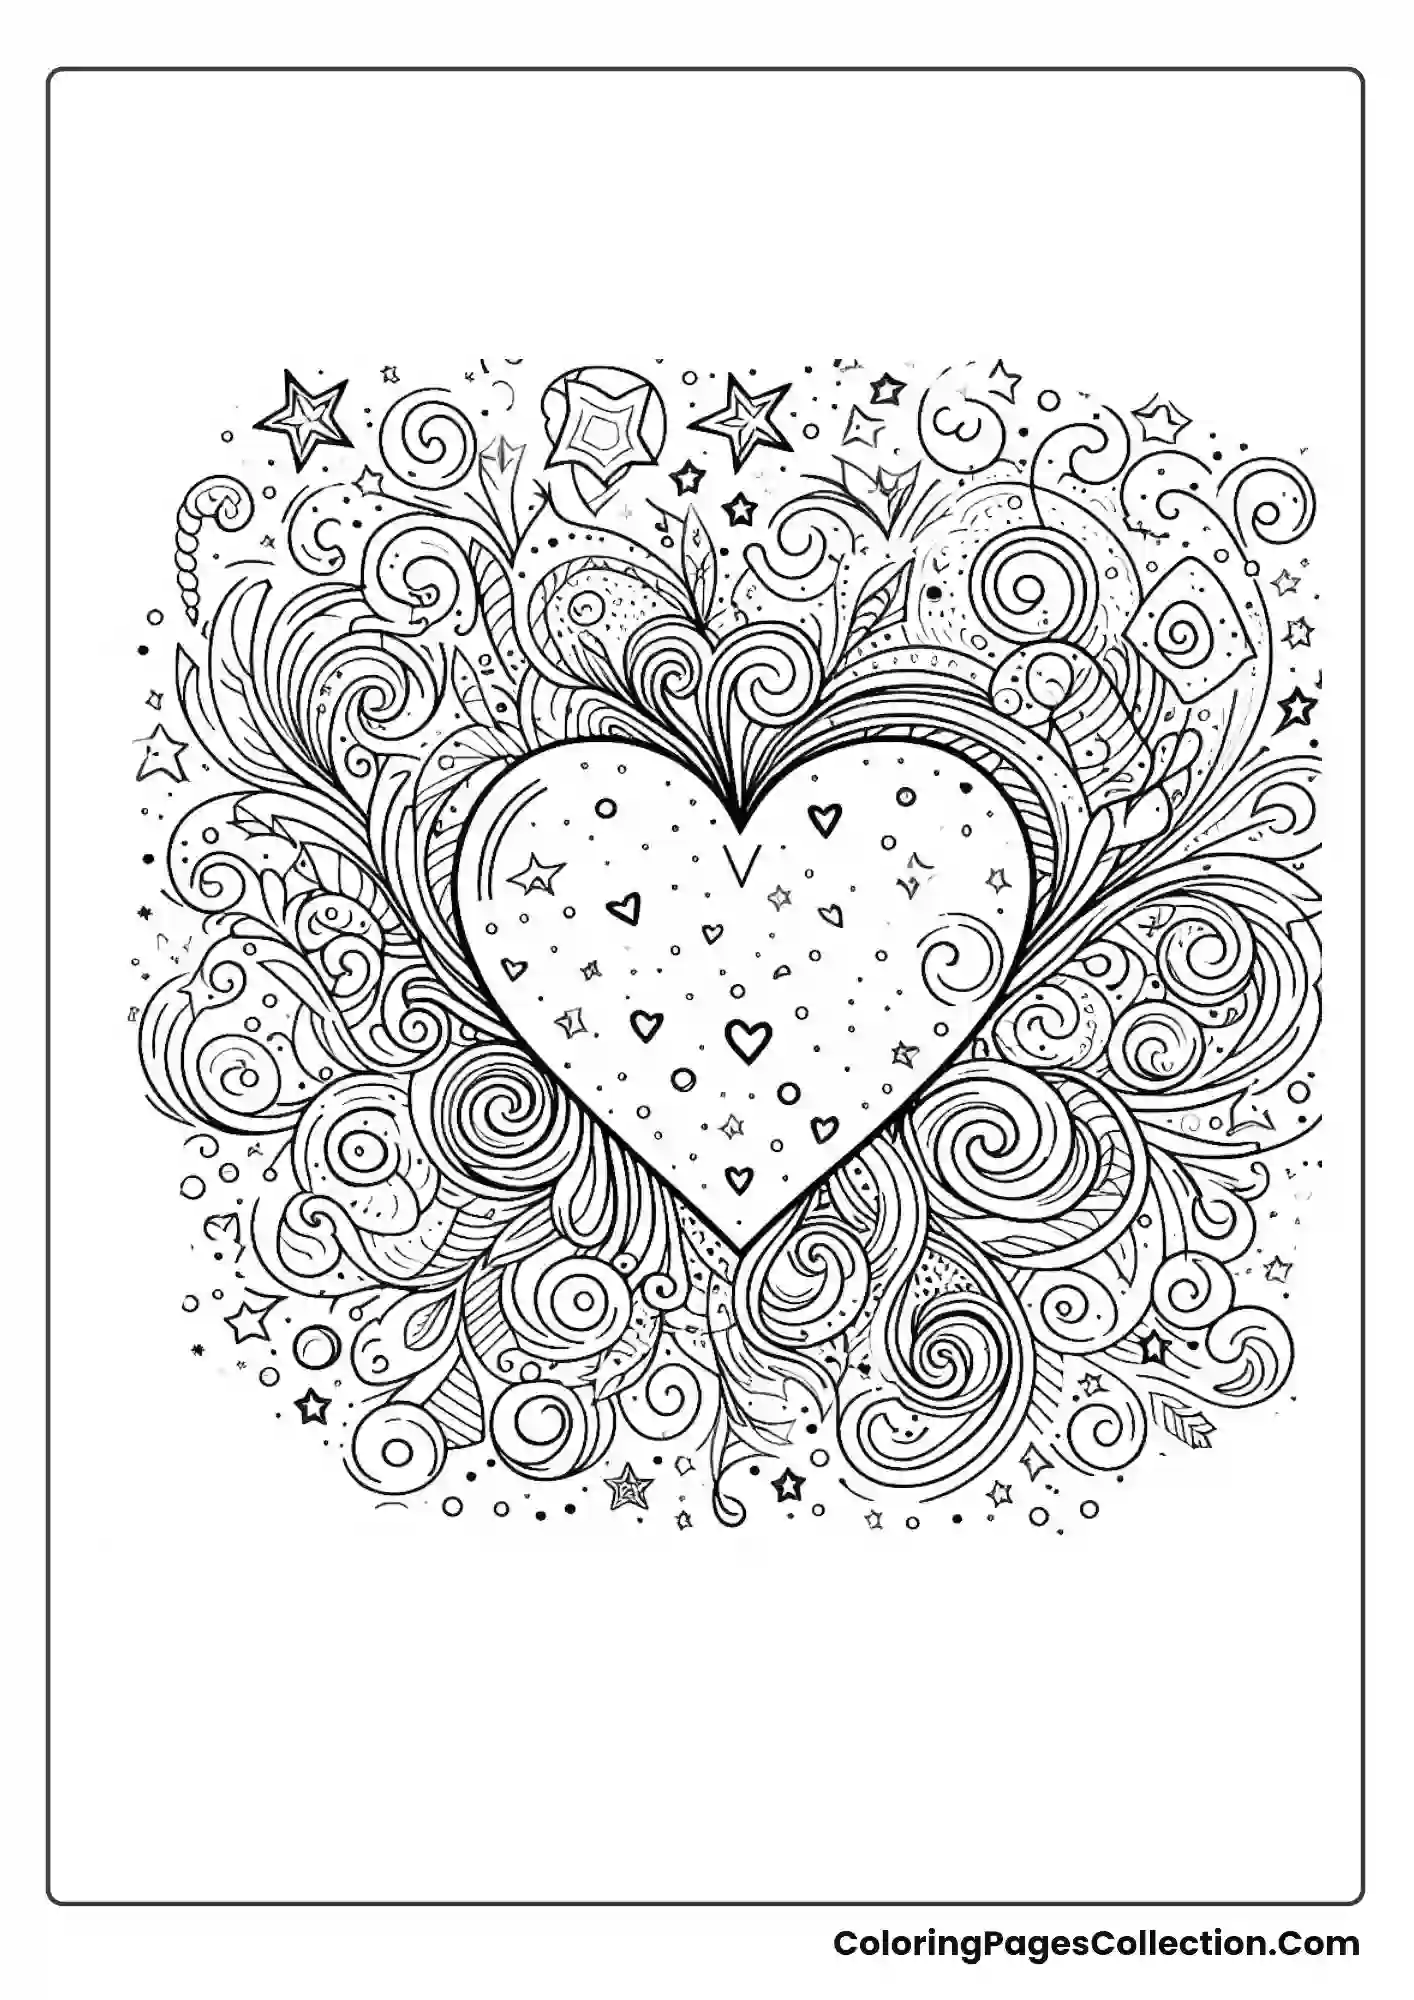 A Heart Surrounded By Swirls, Stars, And Random Shapes